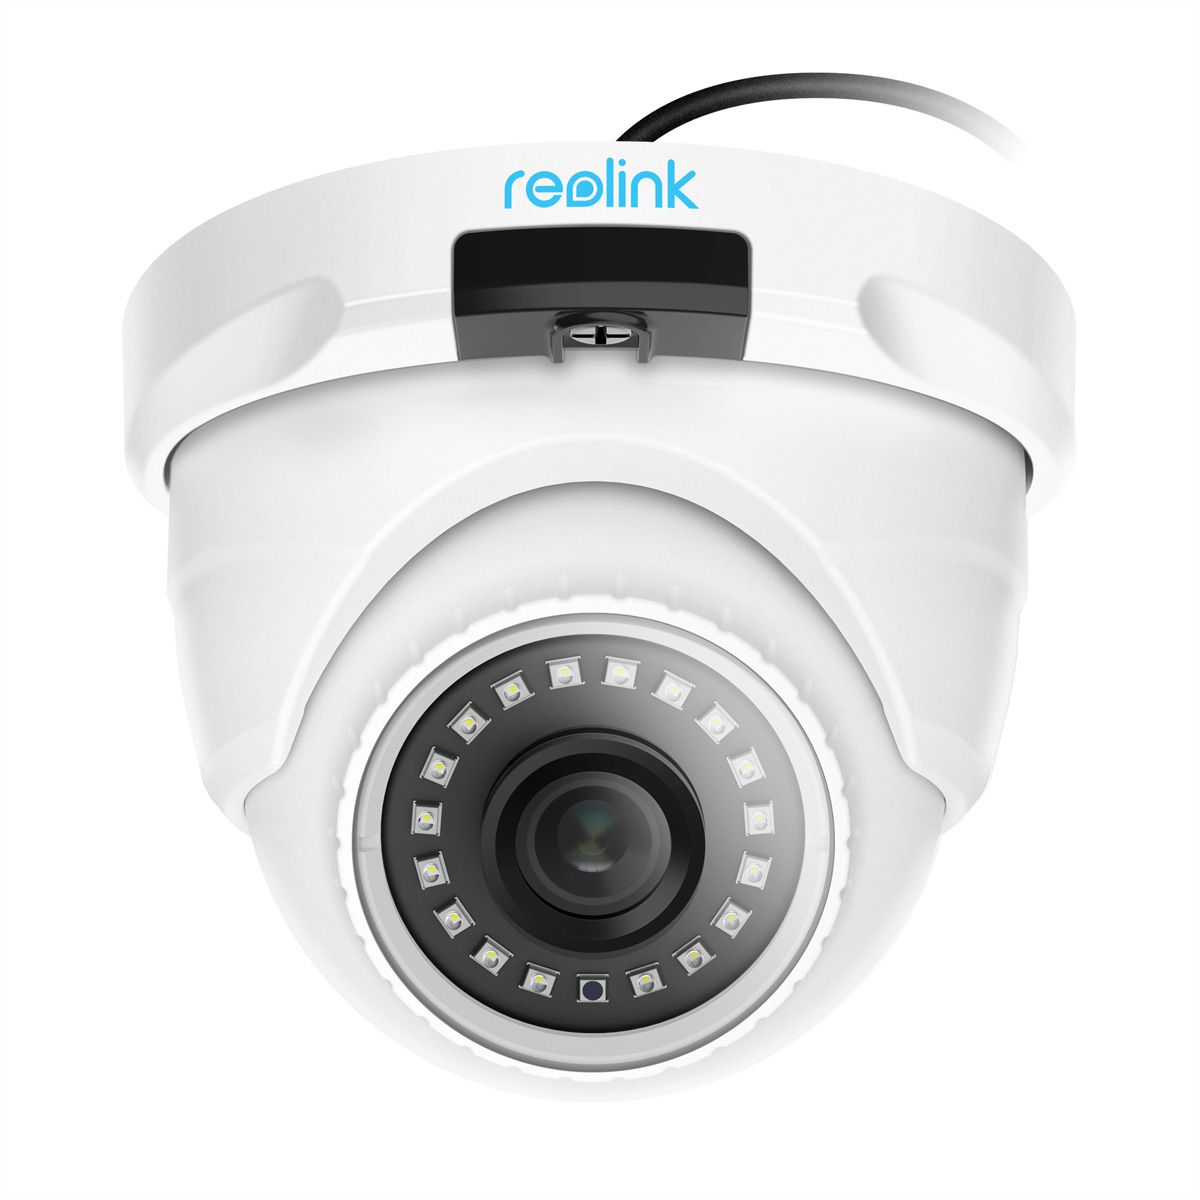 Is Reolink an IP camera?